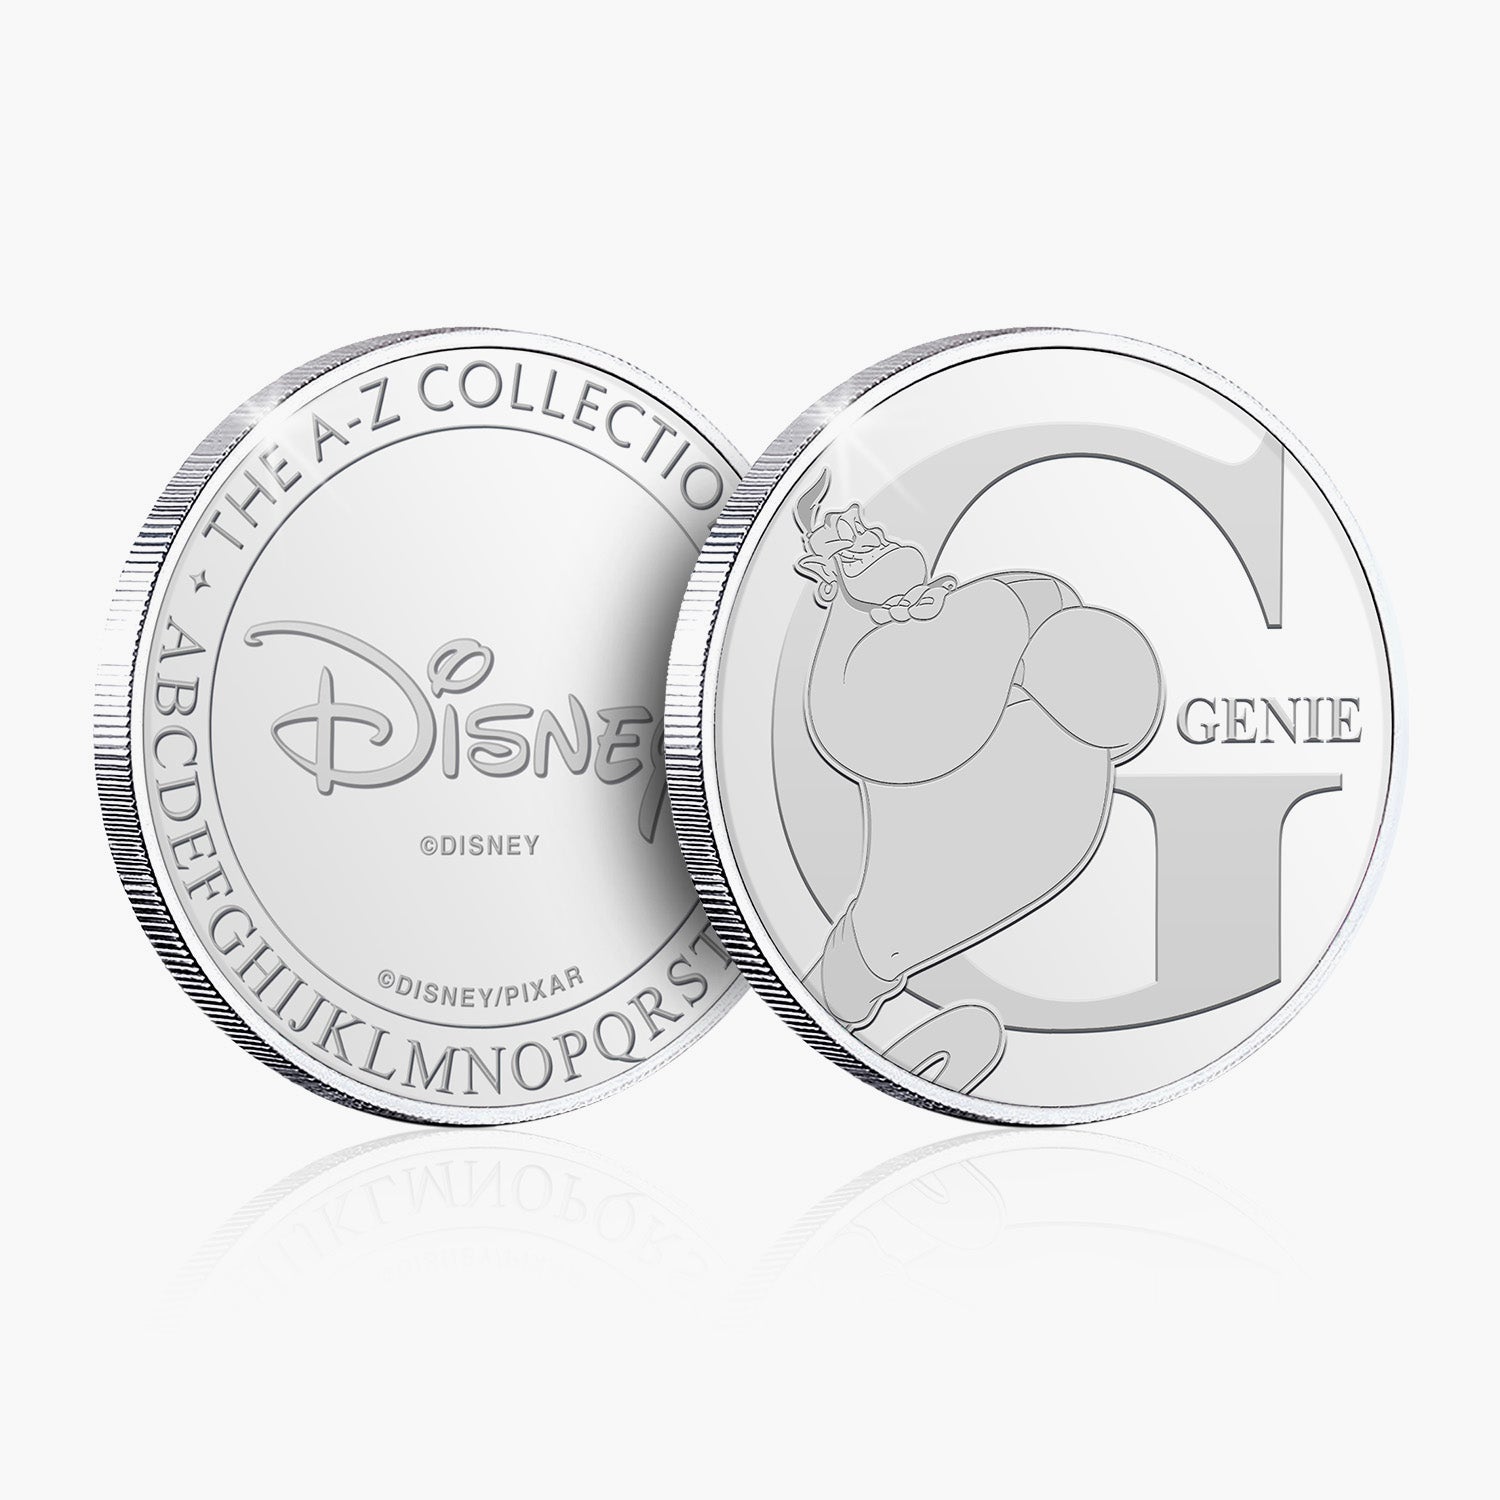 G is for Genie Silver-Plated Commemorative